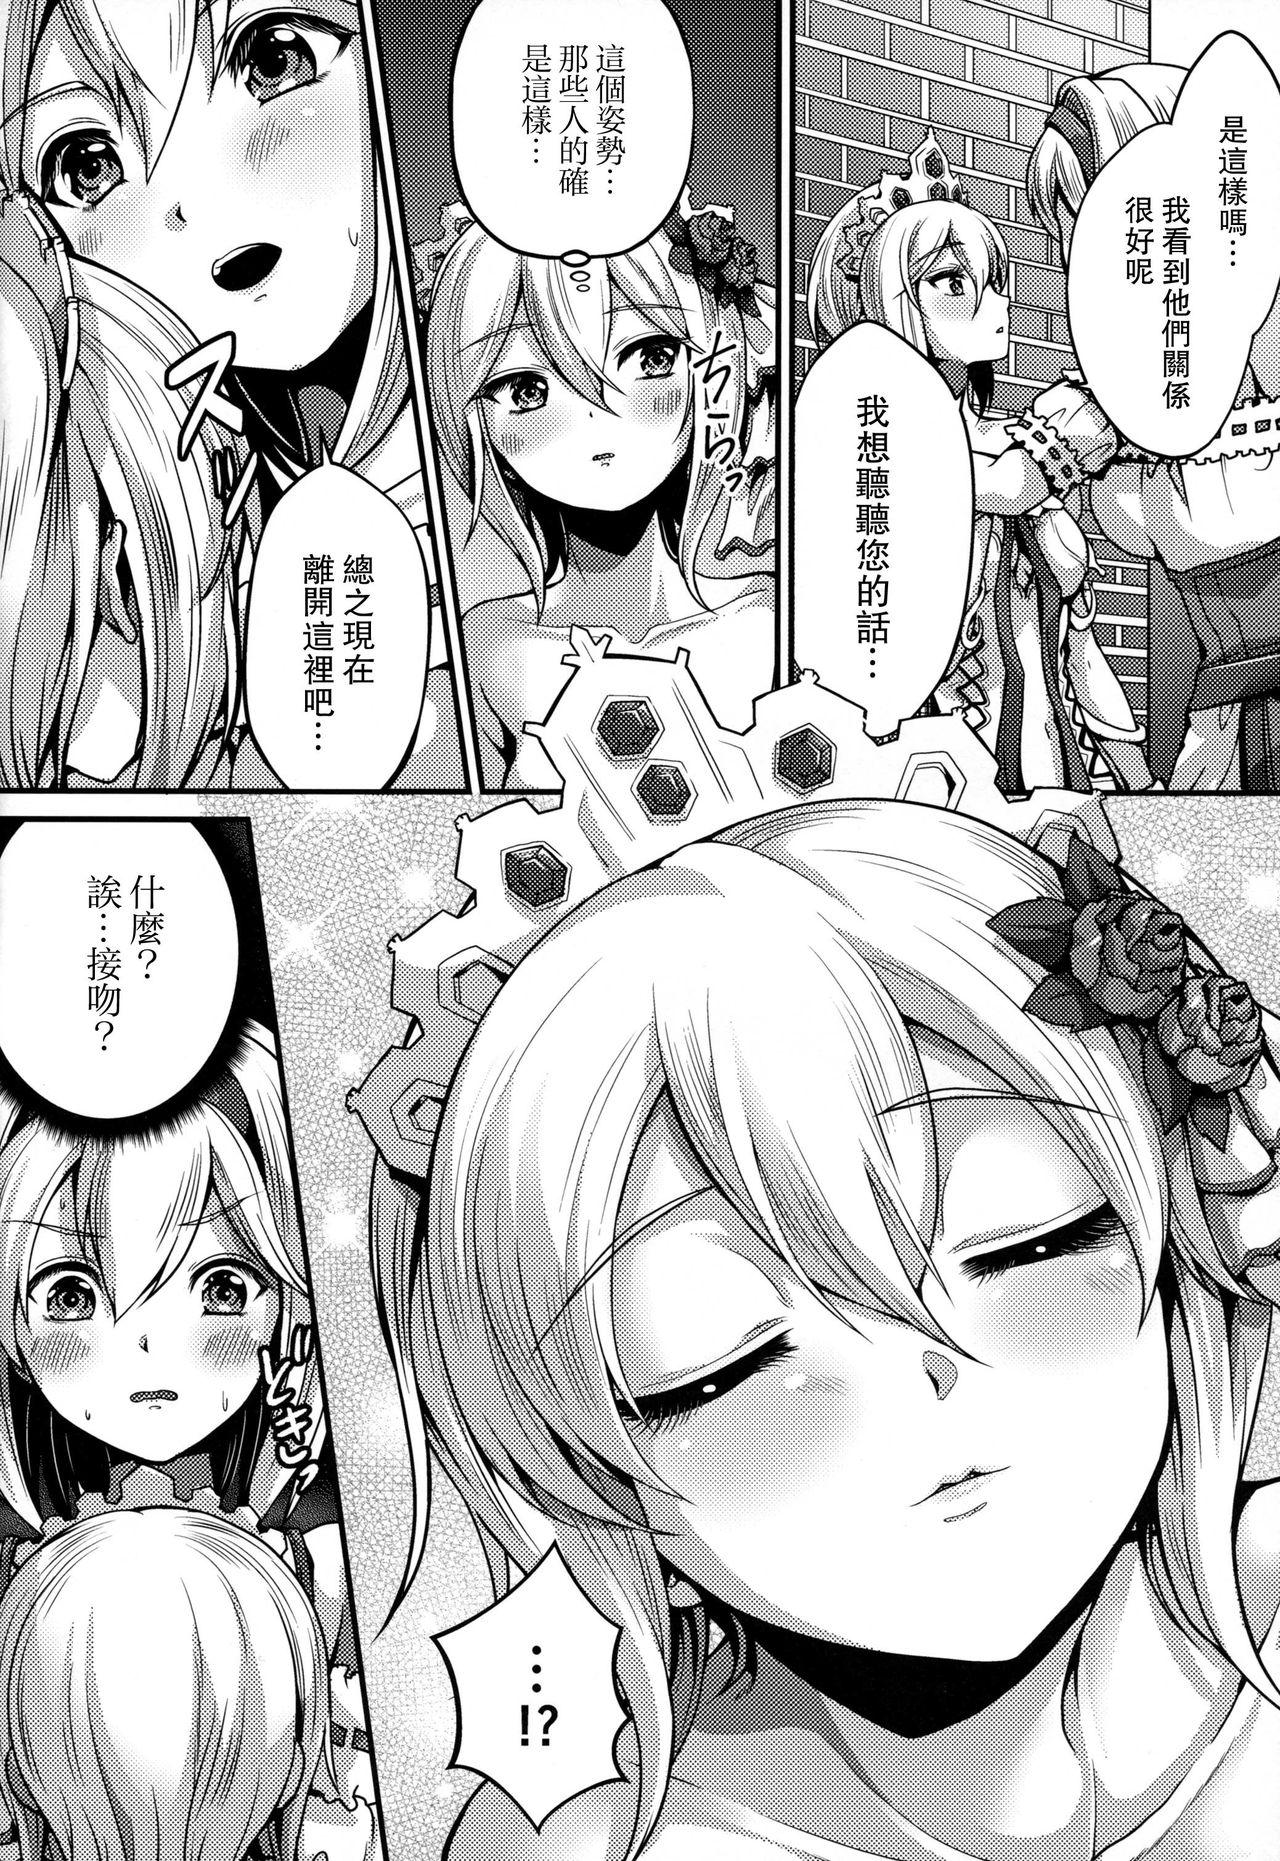 Ride Princess is Seeking Unknown - Granblue fantasy Candid - Page 5